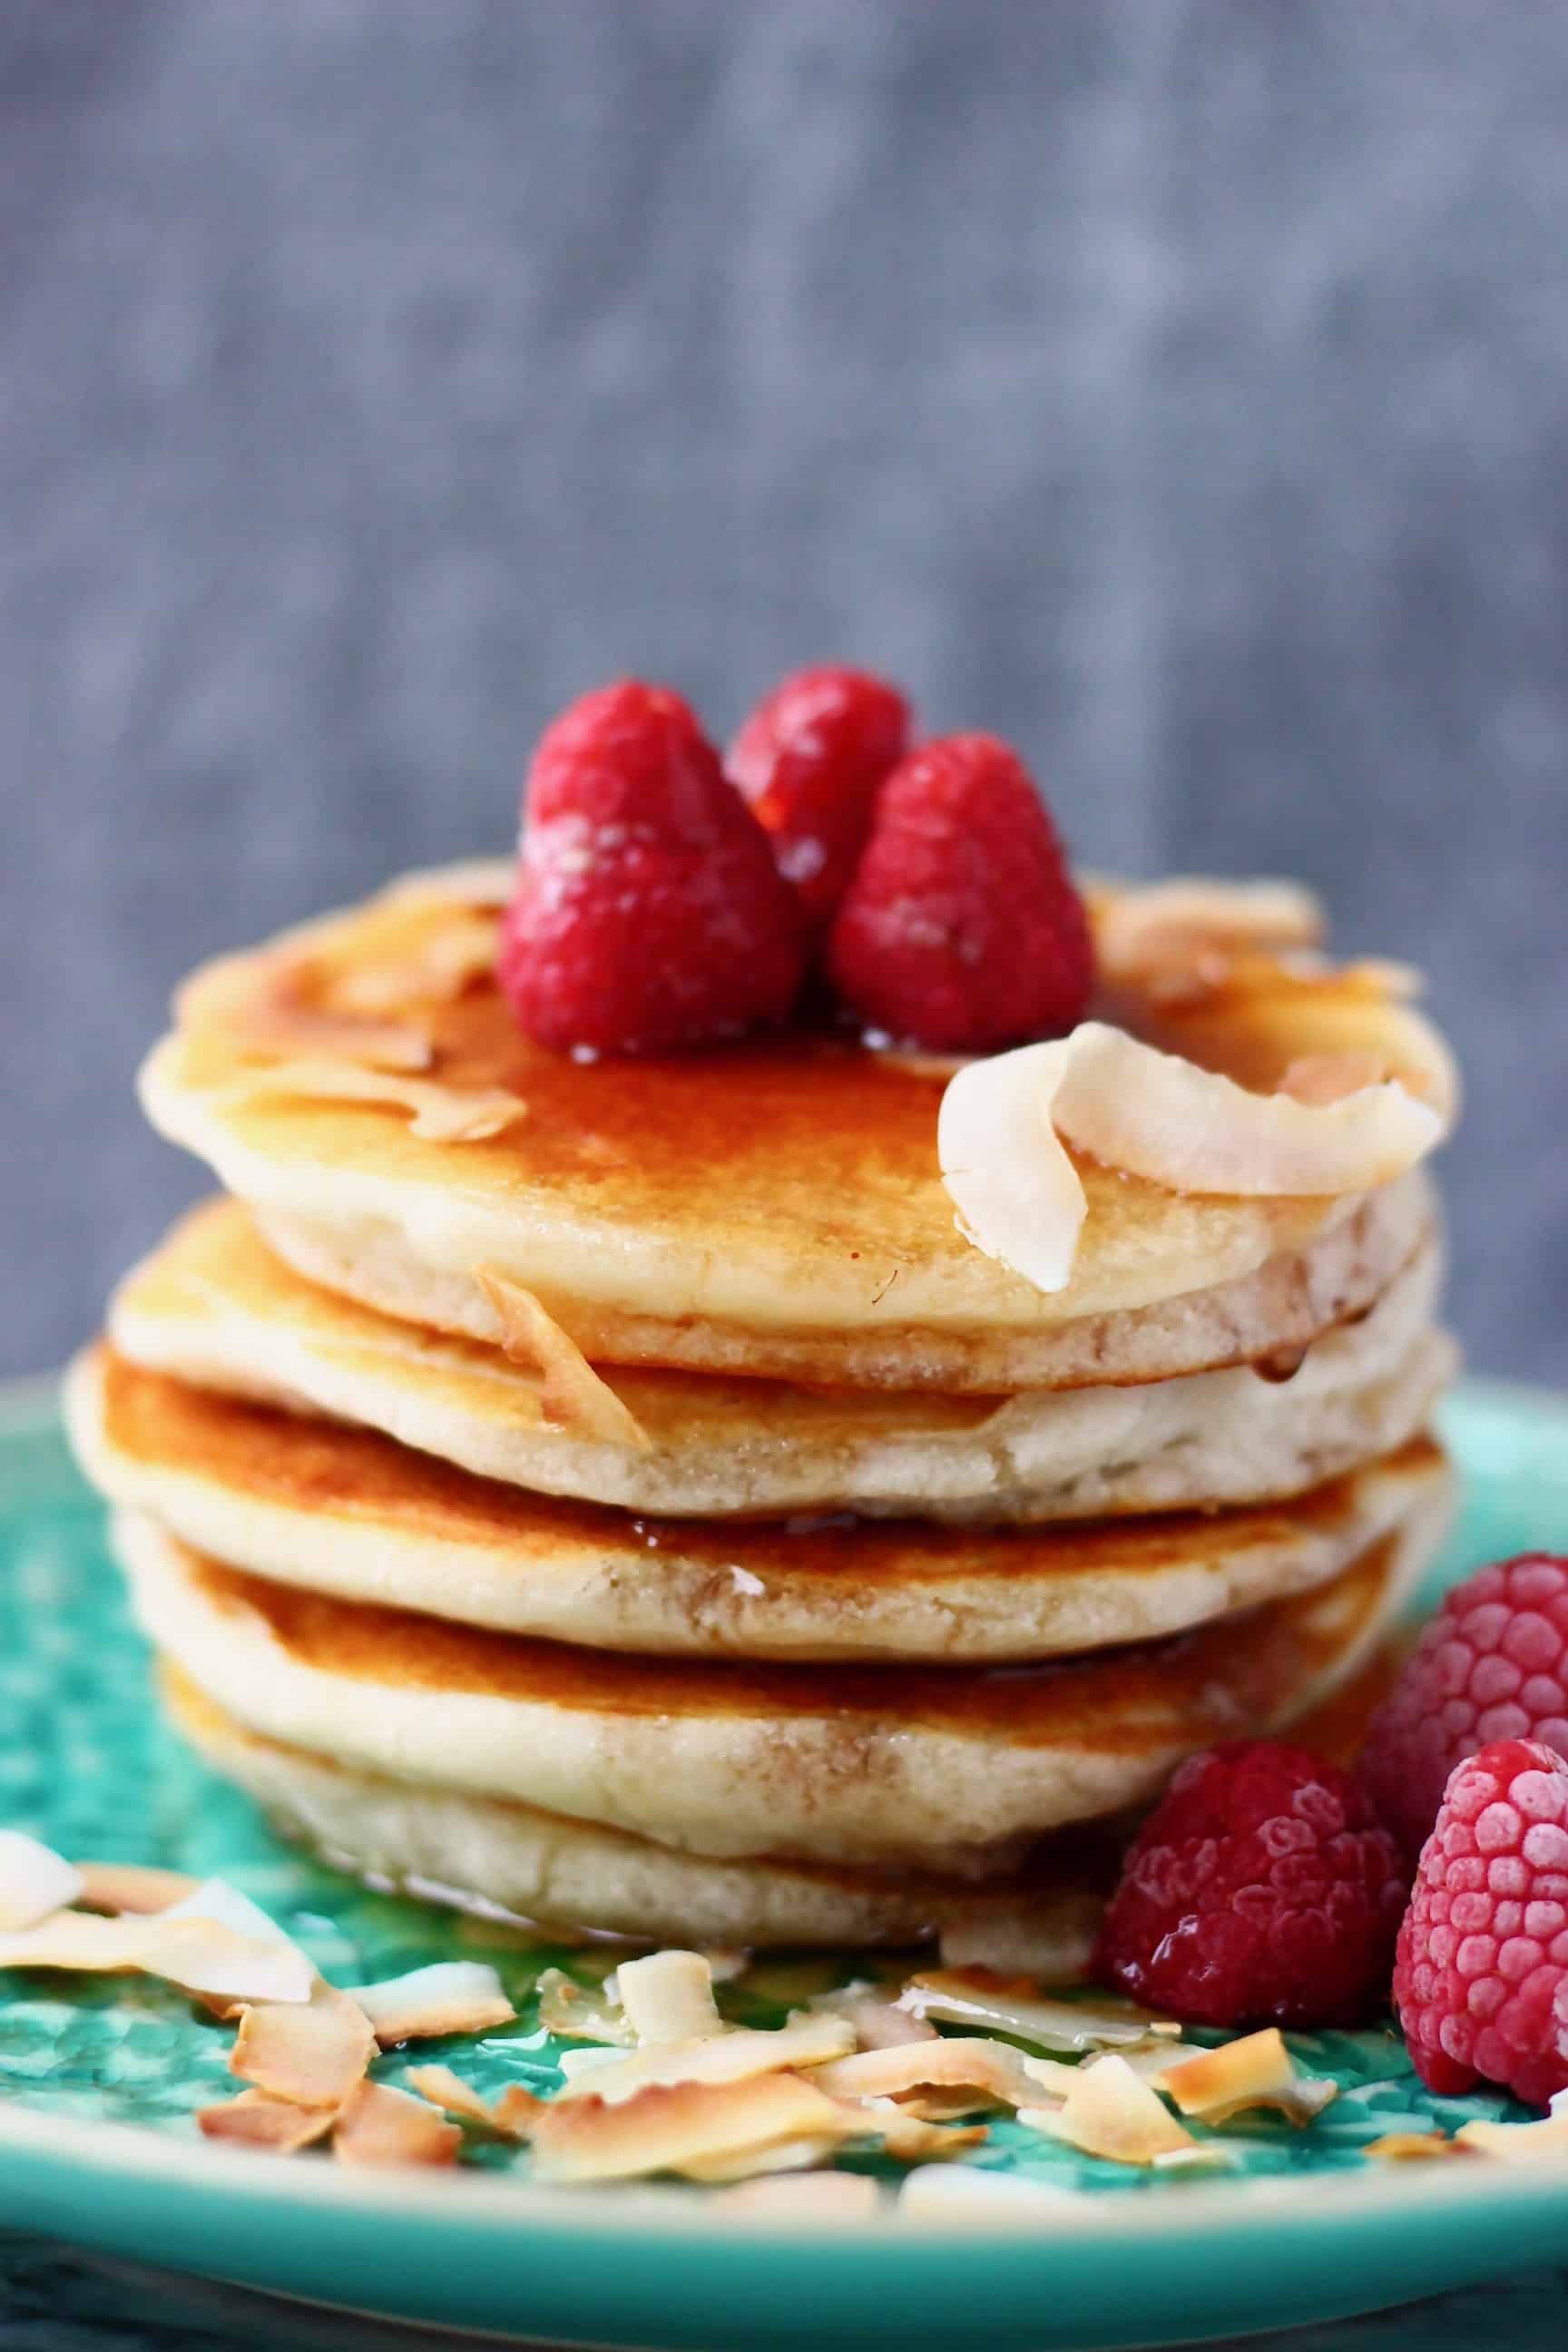 Five vegan coconut flour pancakes stacked in a pile decorated with fresh raspberries on a green plate against a grey background